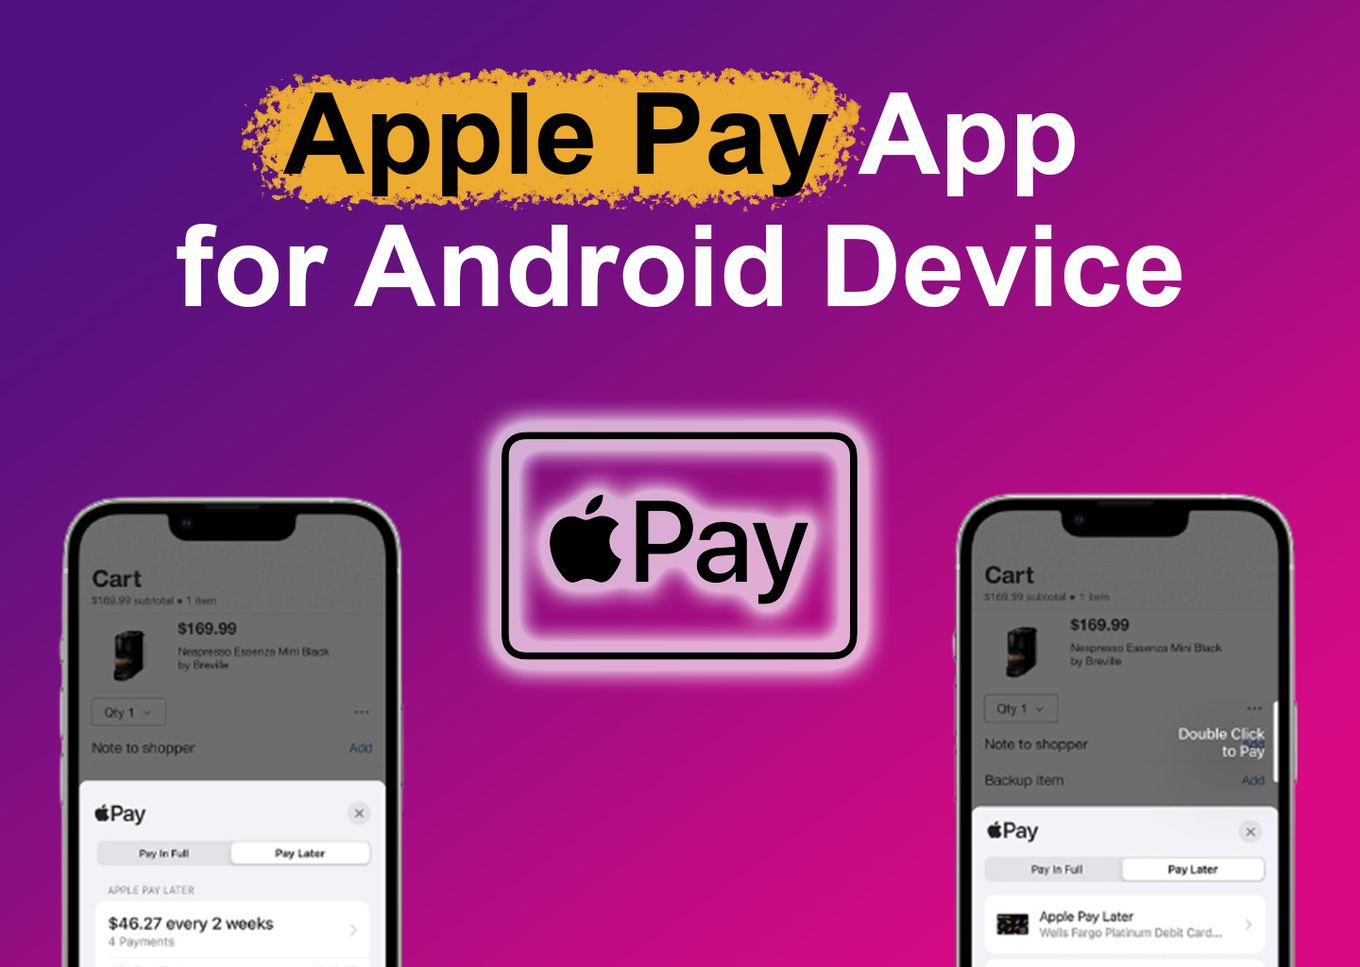 Apple Pay App for Android Device